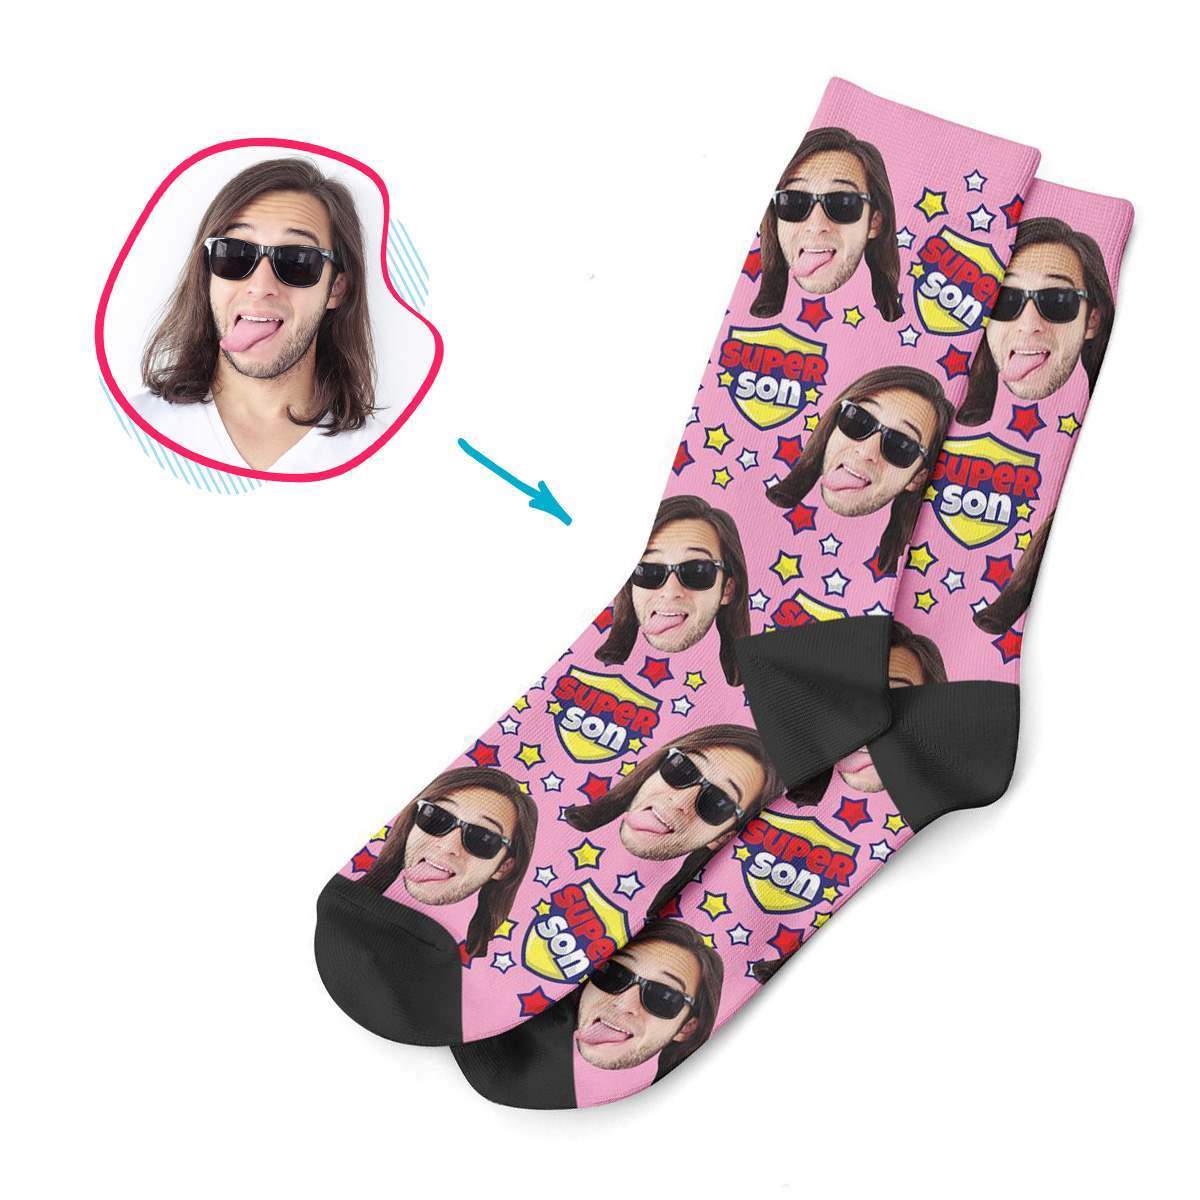 pink Super Son socks personalized with photo of face printed on them